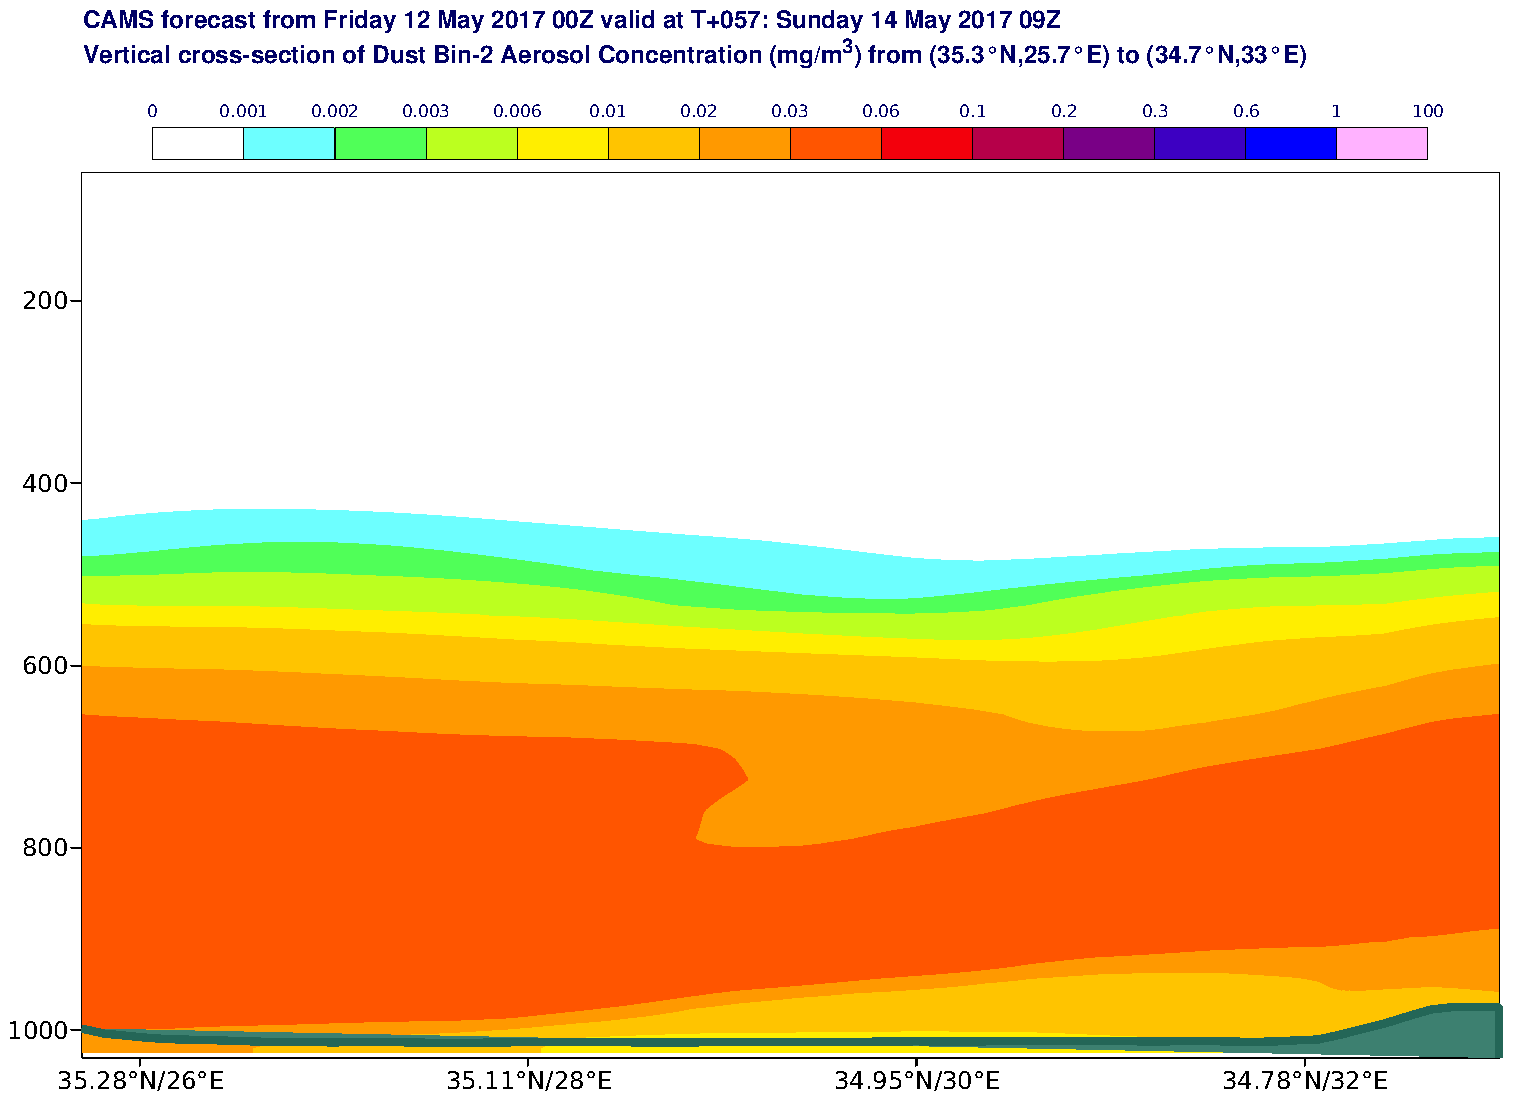 Vertical cross-section of Dust Bin-2 Aerosol Concentration (mg/m3) valid at T57 - 2017-05-14 09:00